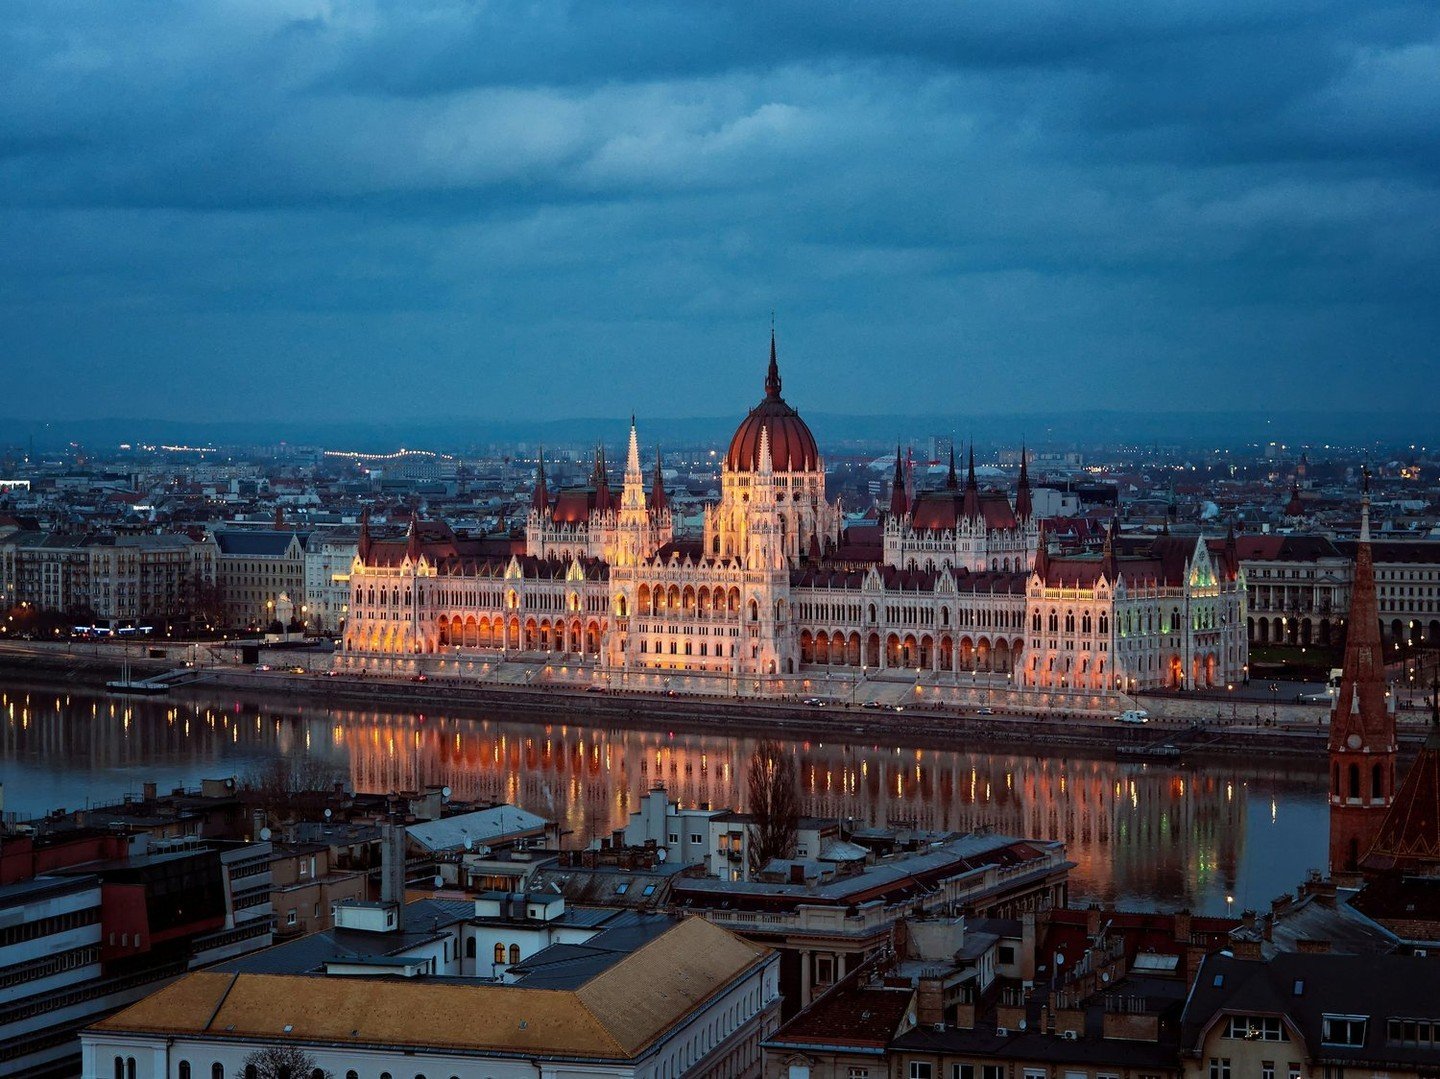 📸 Discover the magic of Budapest through your lens! Join me on a captivating photo walk or photography workshop and experience this stunning city like never before. From hidden gems to iconic landmarks, Budapest offers endless opportunities to hone 